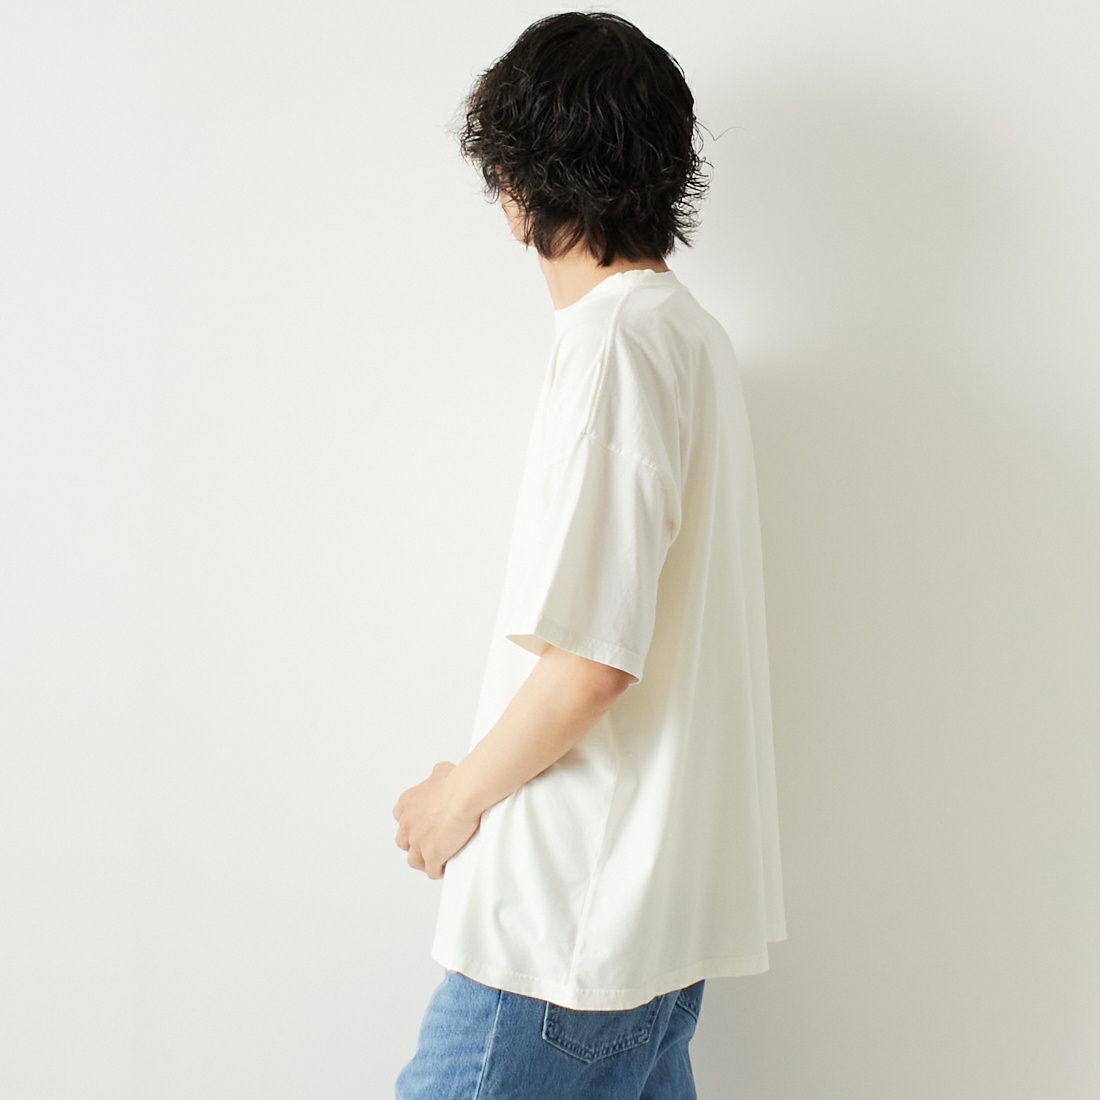 REMI RELIEF [レミレリーフ] 別注 20天竺プリントTシャツ CHANGE [RN24329257-JF] OFF &&モデル身長：182cm 着用サイズ：M&&